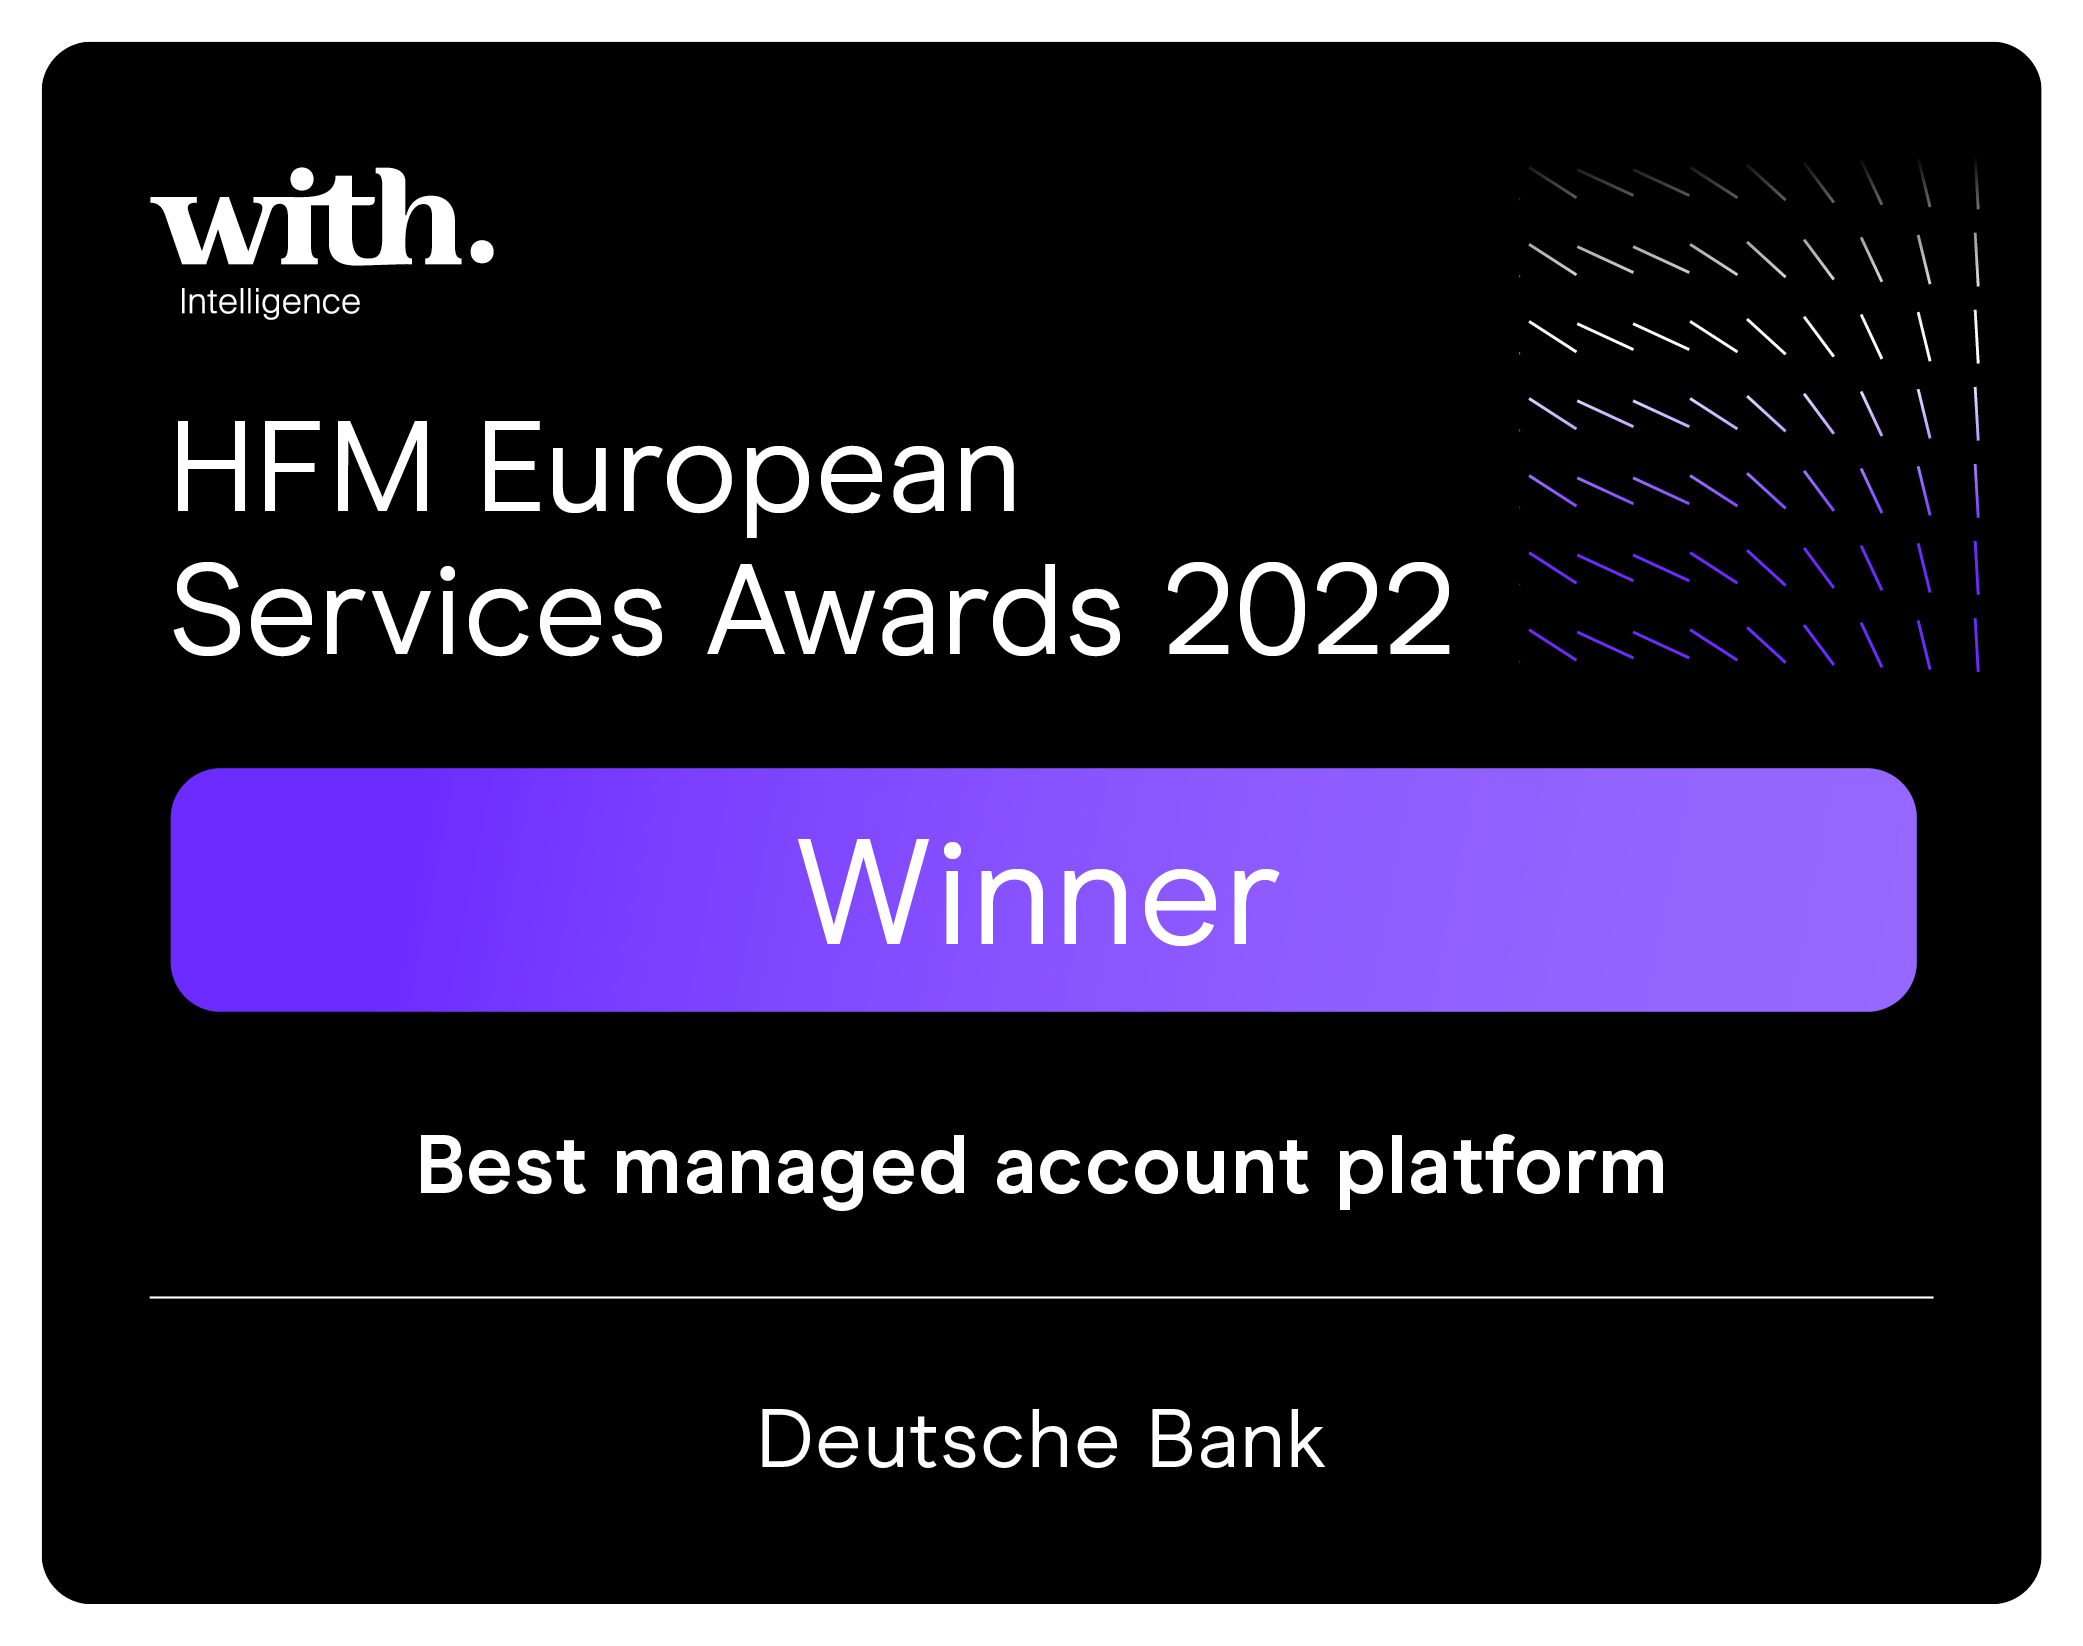 WINNER as a Best managed account platform by HFM European Services Awards 2022